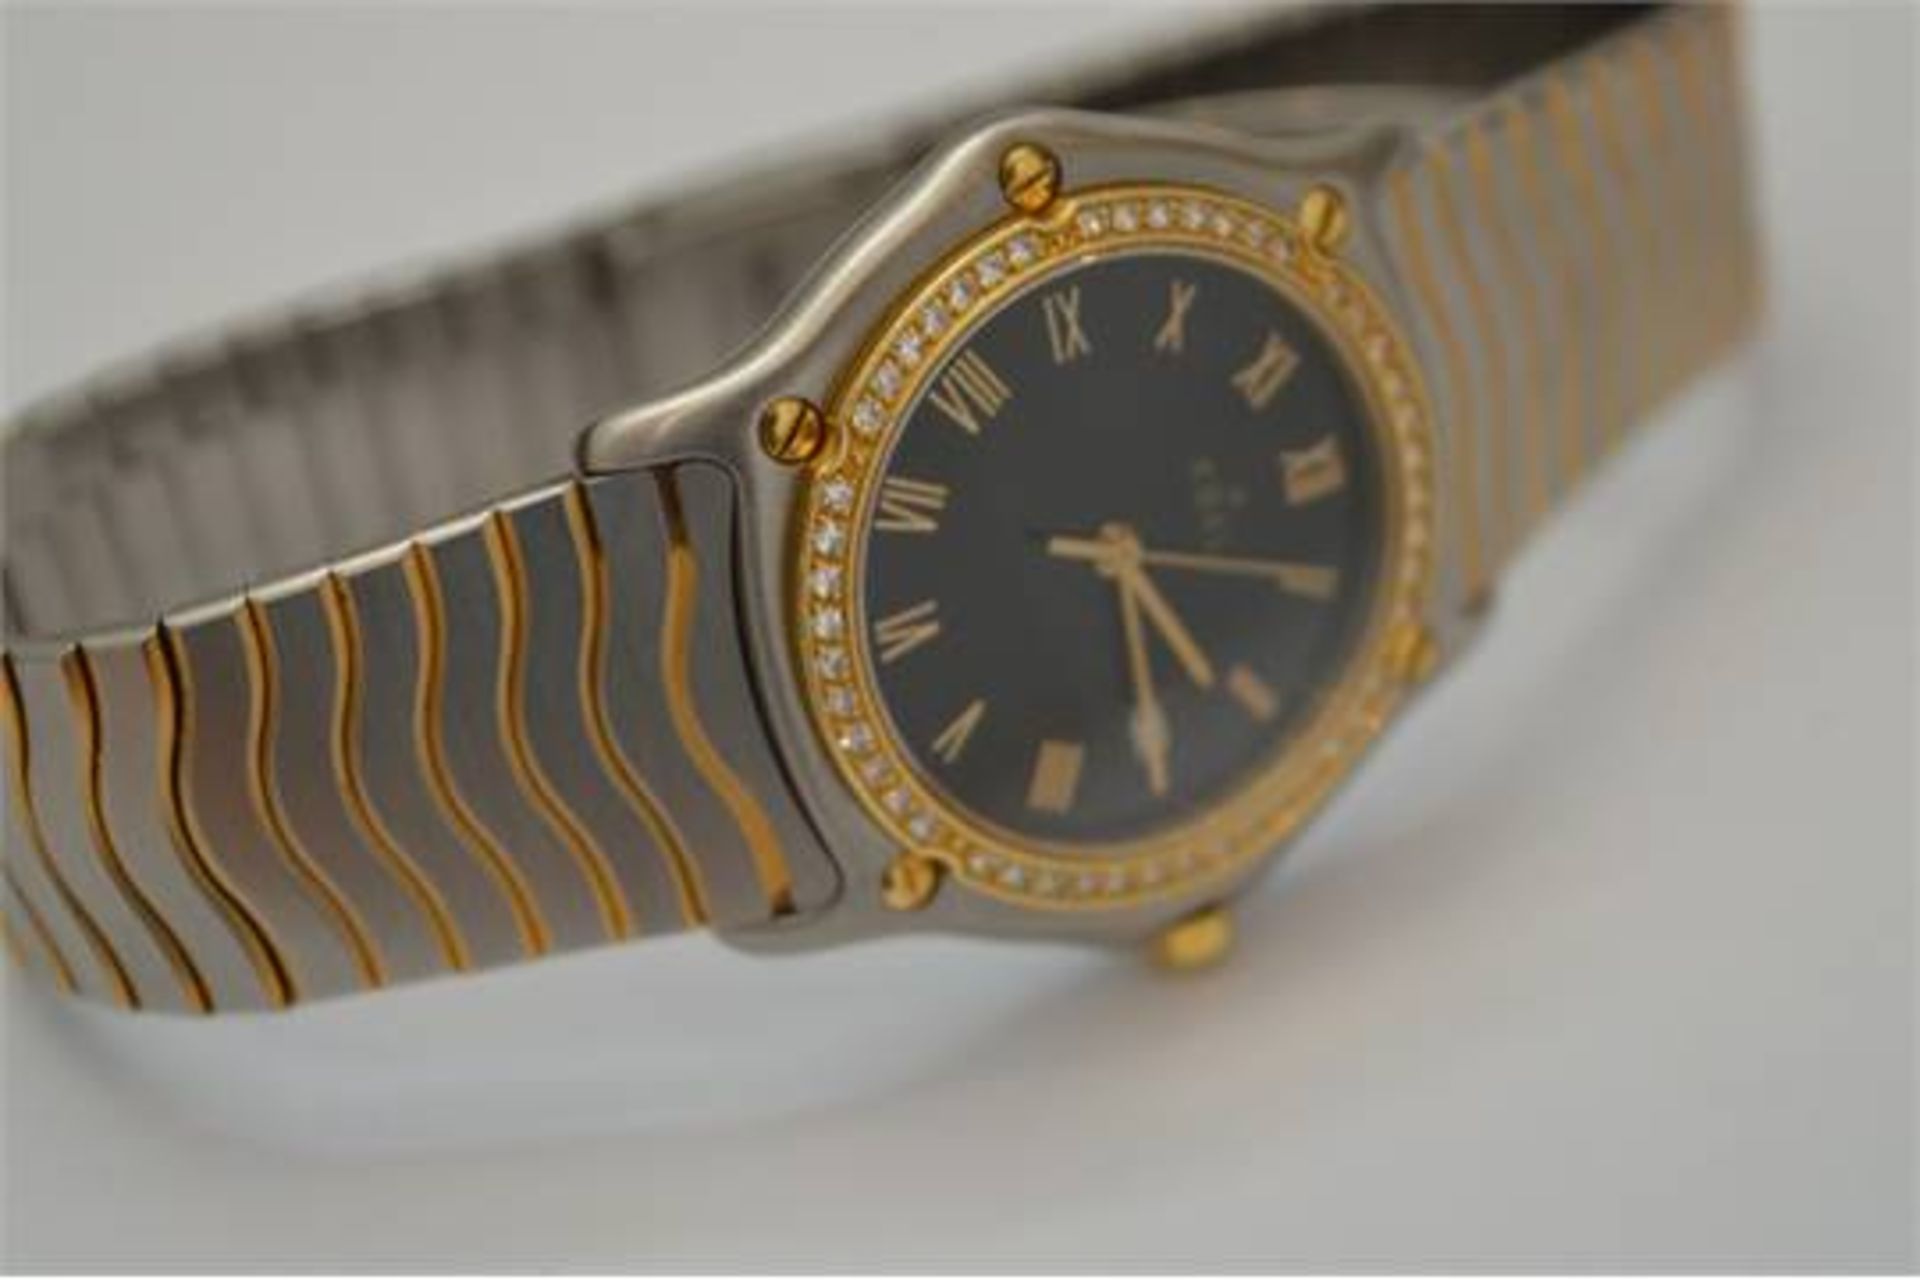 EBEL BIMETAL, 18K GOLD AND STAINLESS STEEL, DIAMOND BEZEL, BLACK DIAL (CS) ***PLEASE NOTE THERE IS - Image 4 of 4